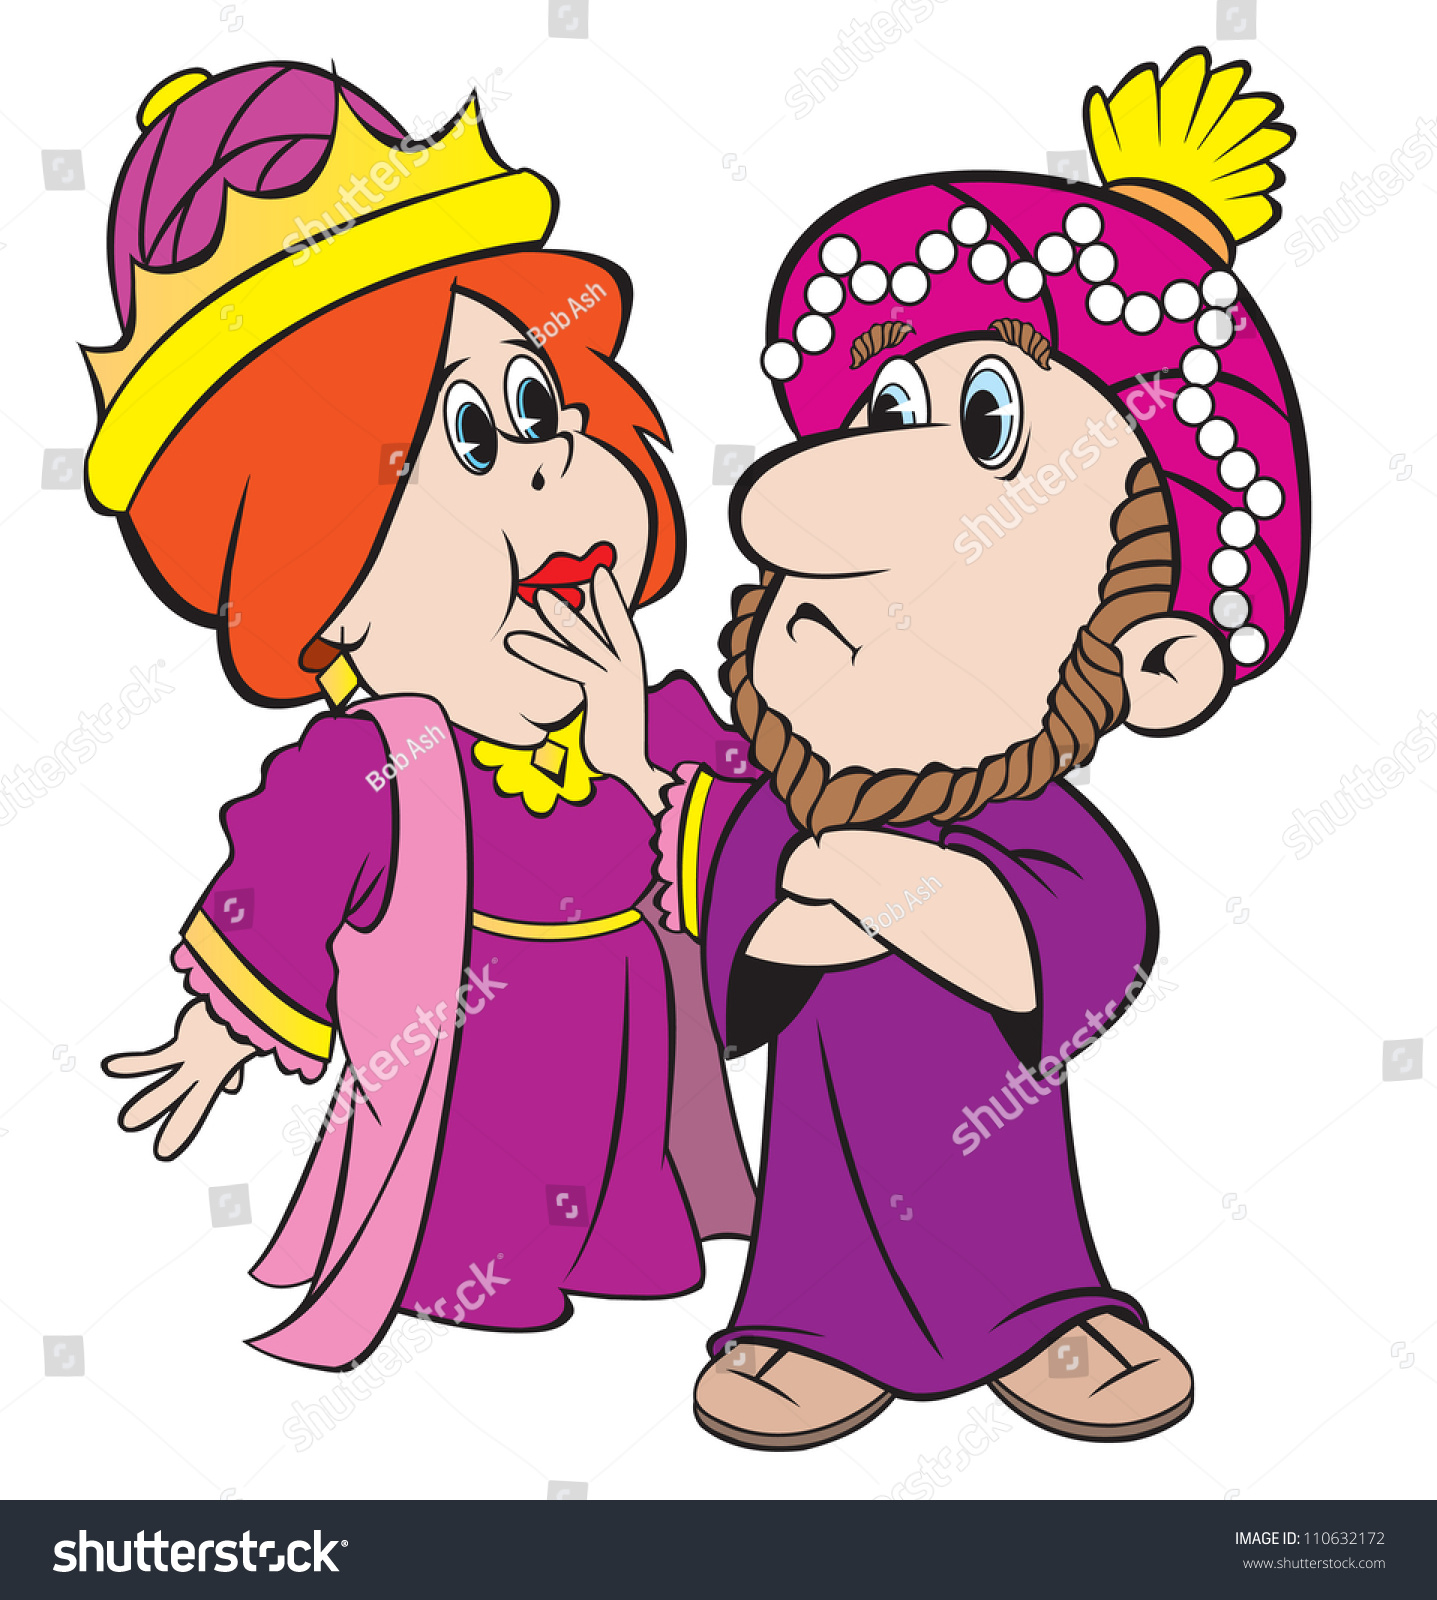 clipart of king and queen - photo #43